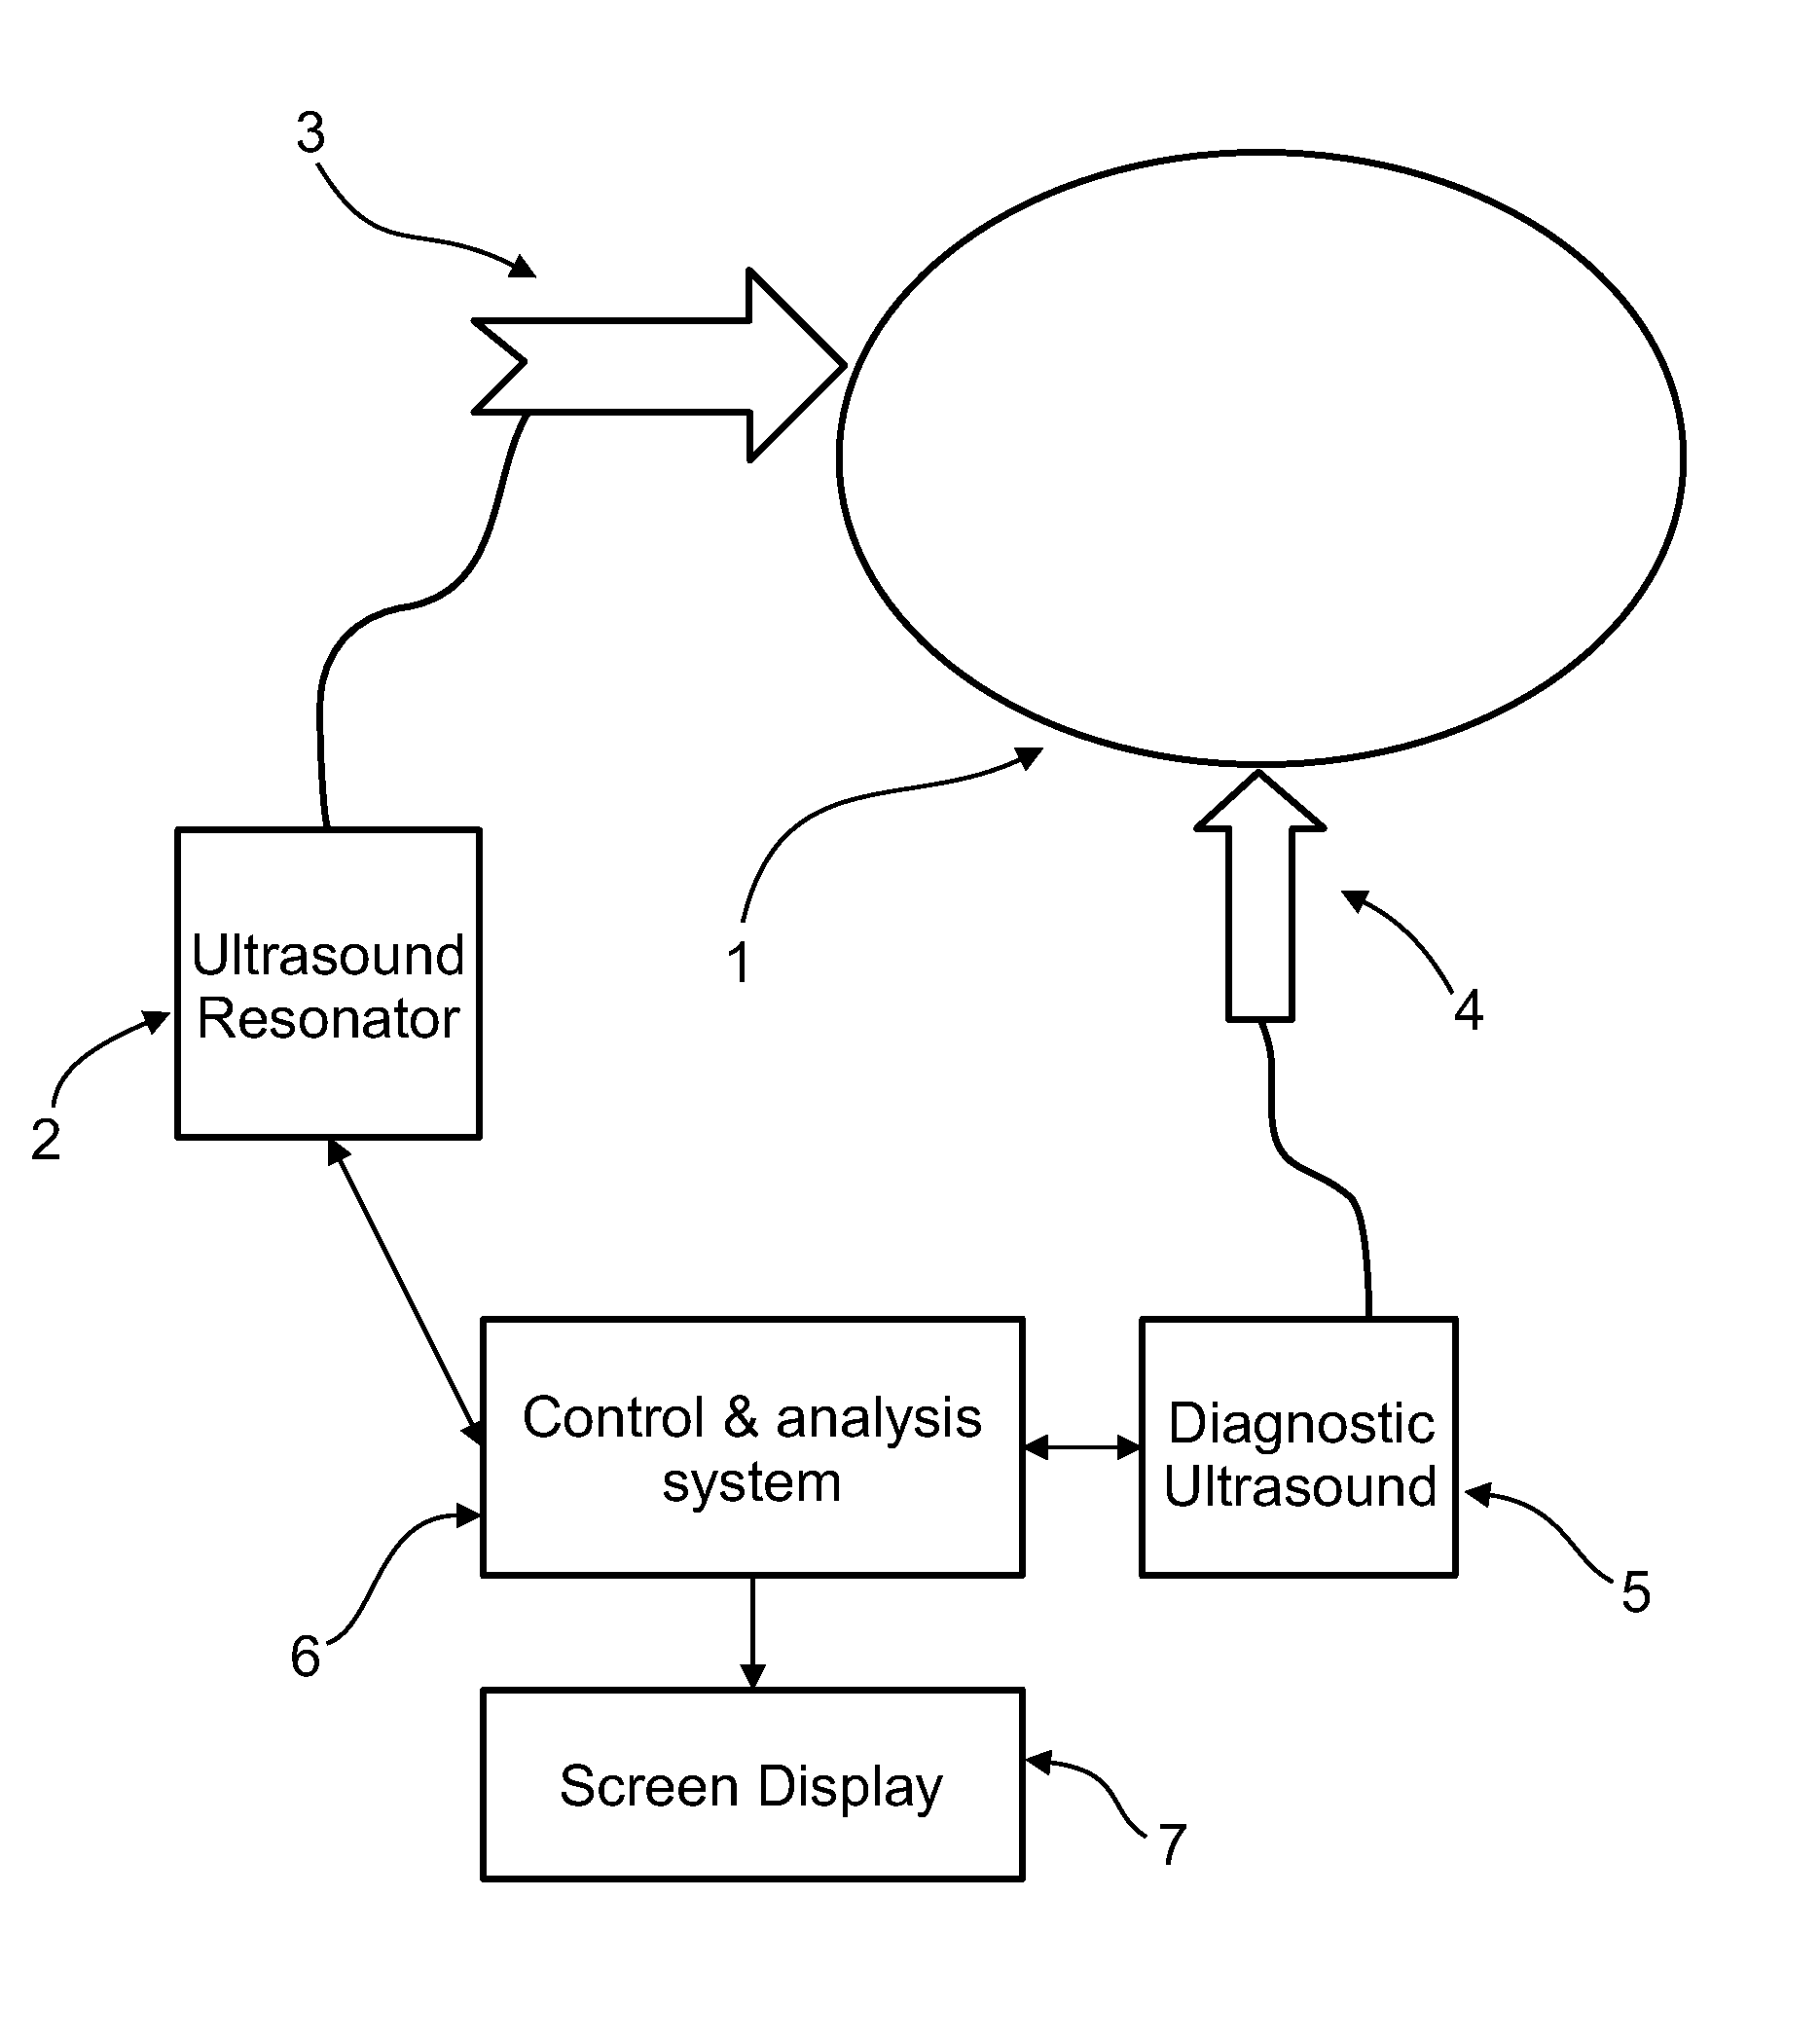 Method and system for tissue imaging and analysis